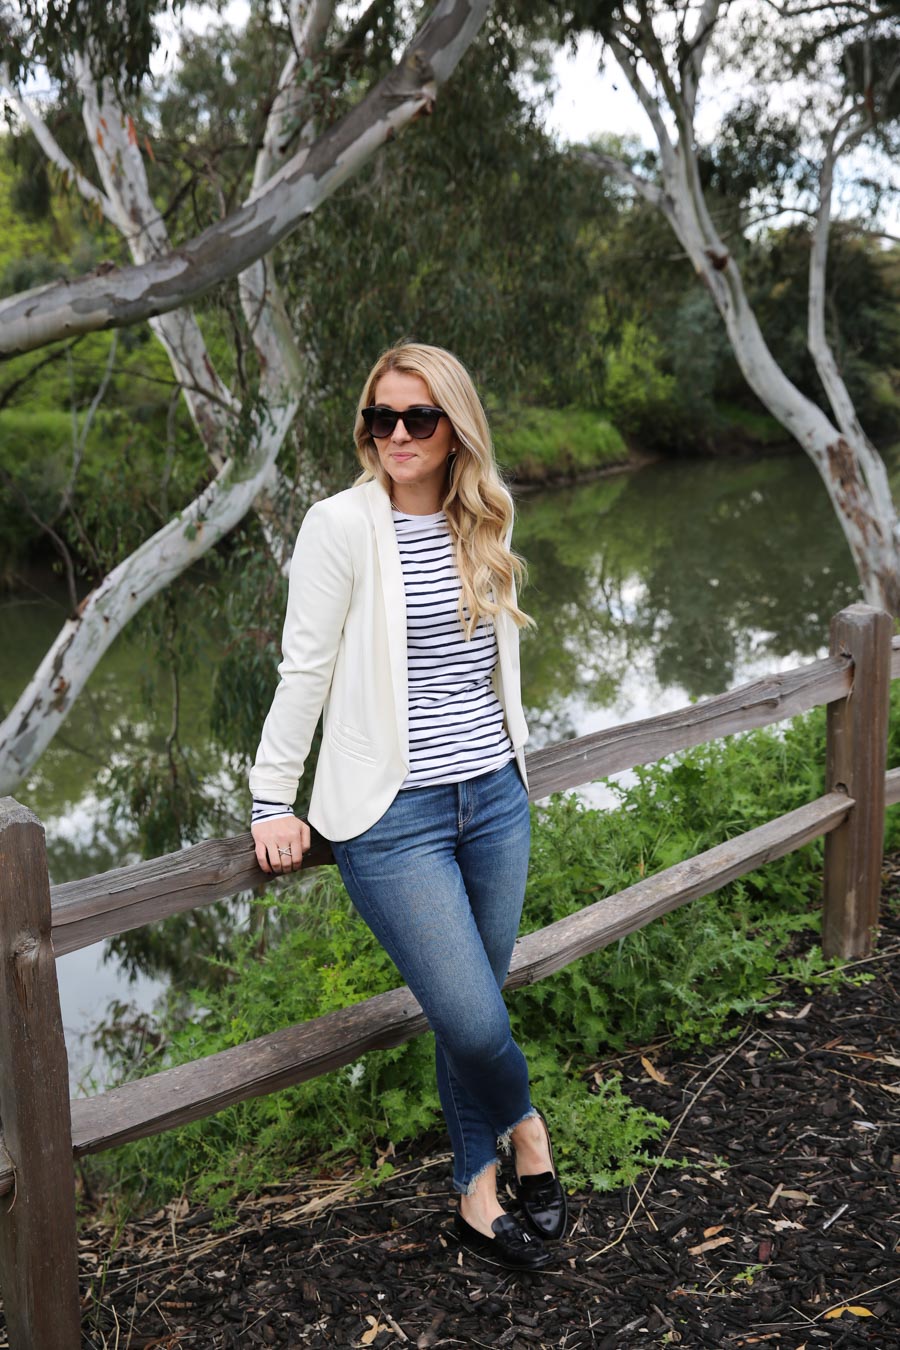 https://www.lucismorsels.com/wp-content/uploads/2018/04/What-to-Wear-in-Wine-Country-Striped-Shirt-Jeans-2.jpg